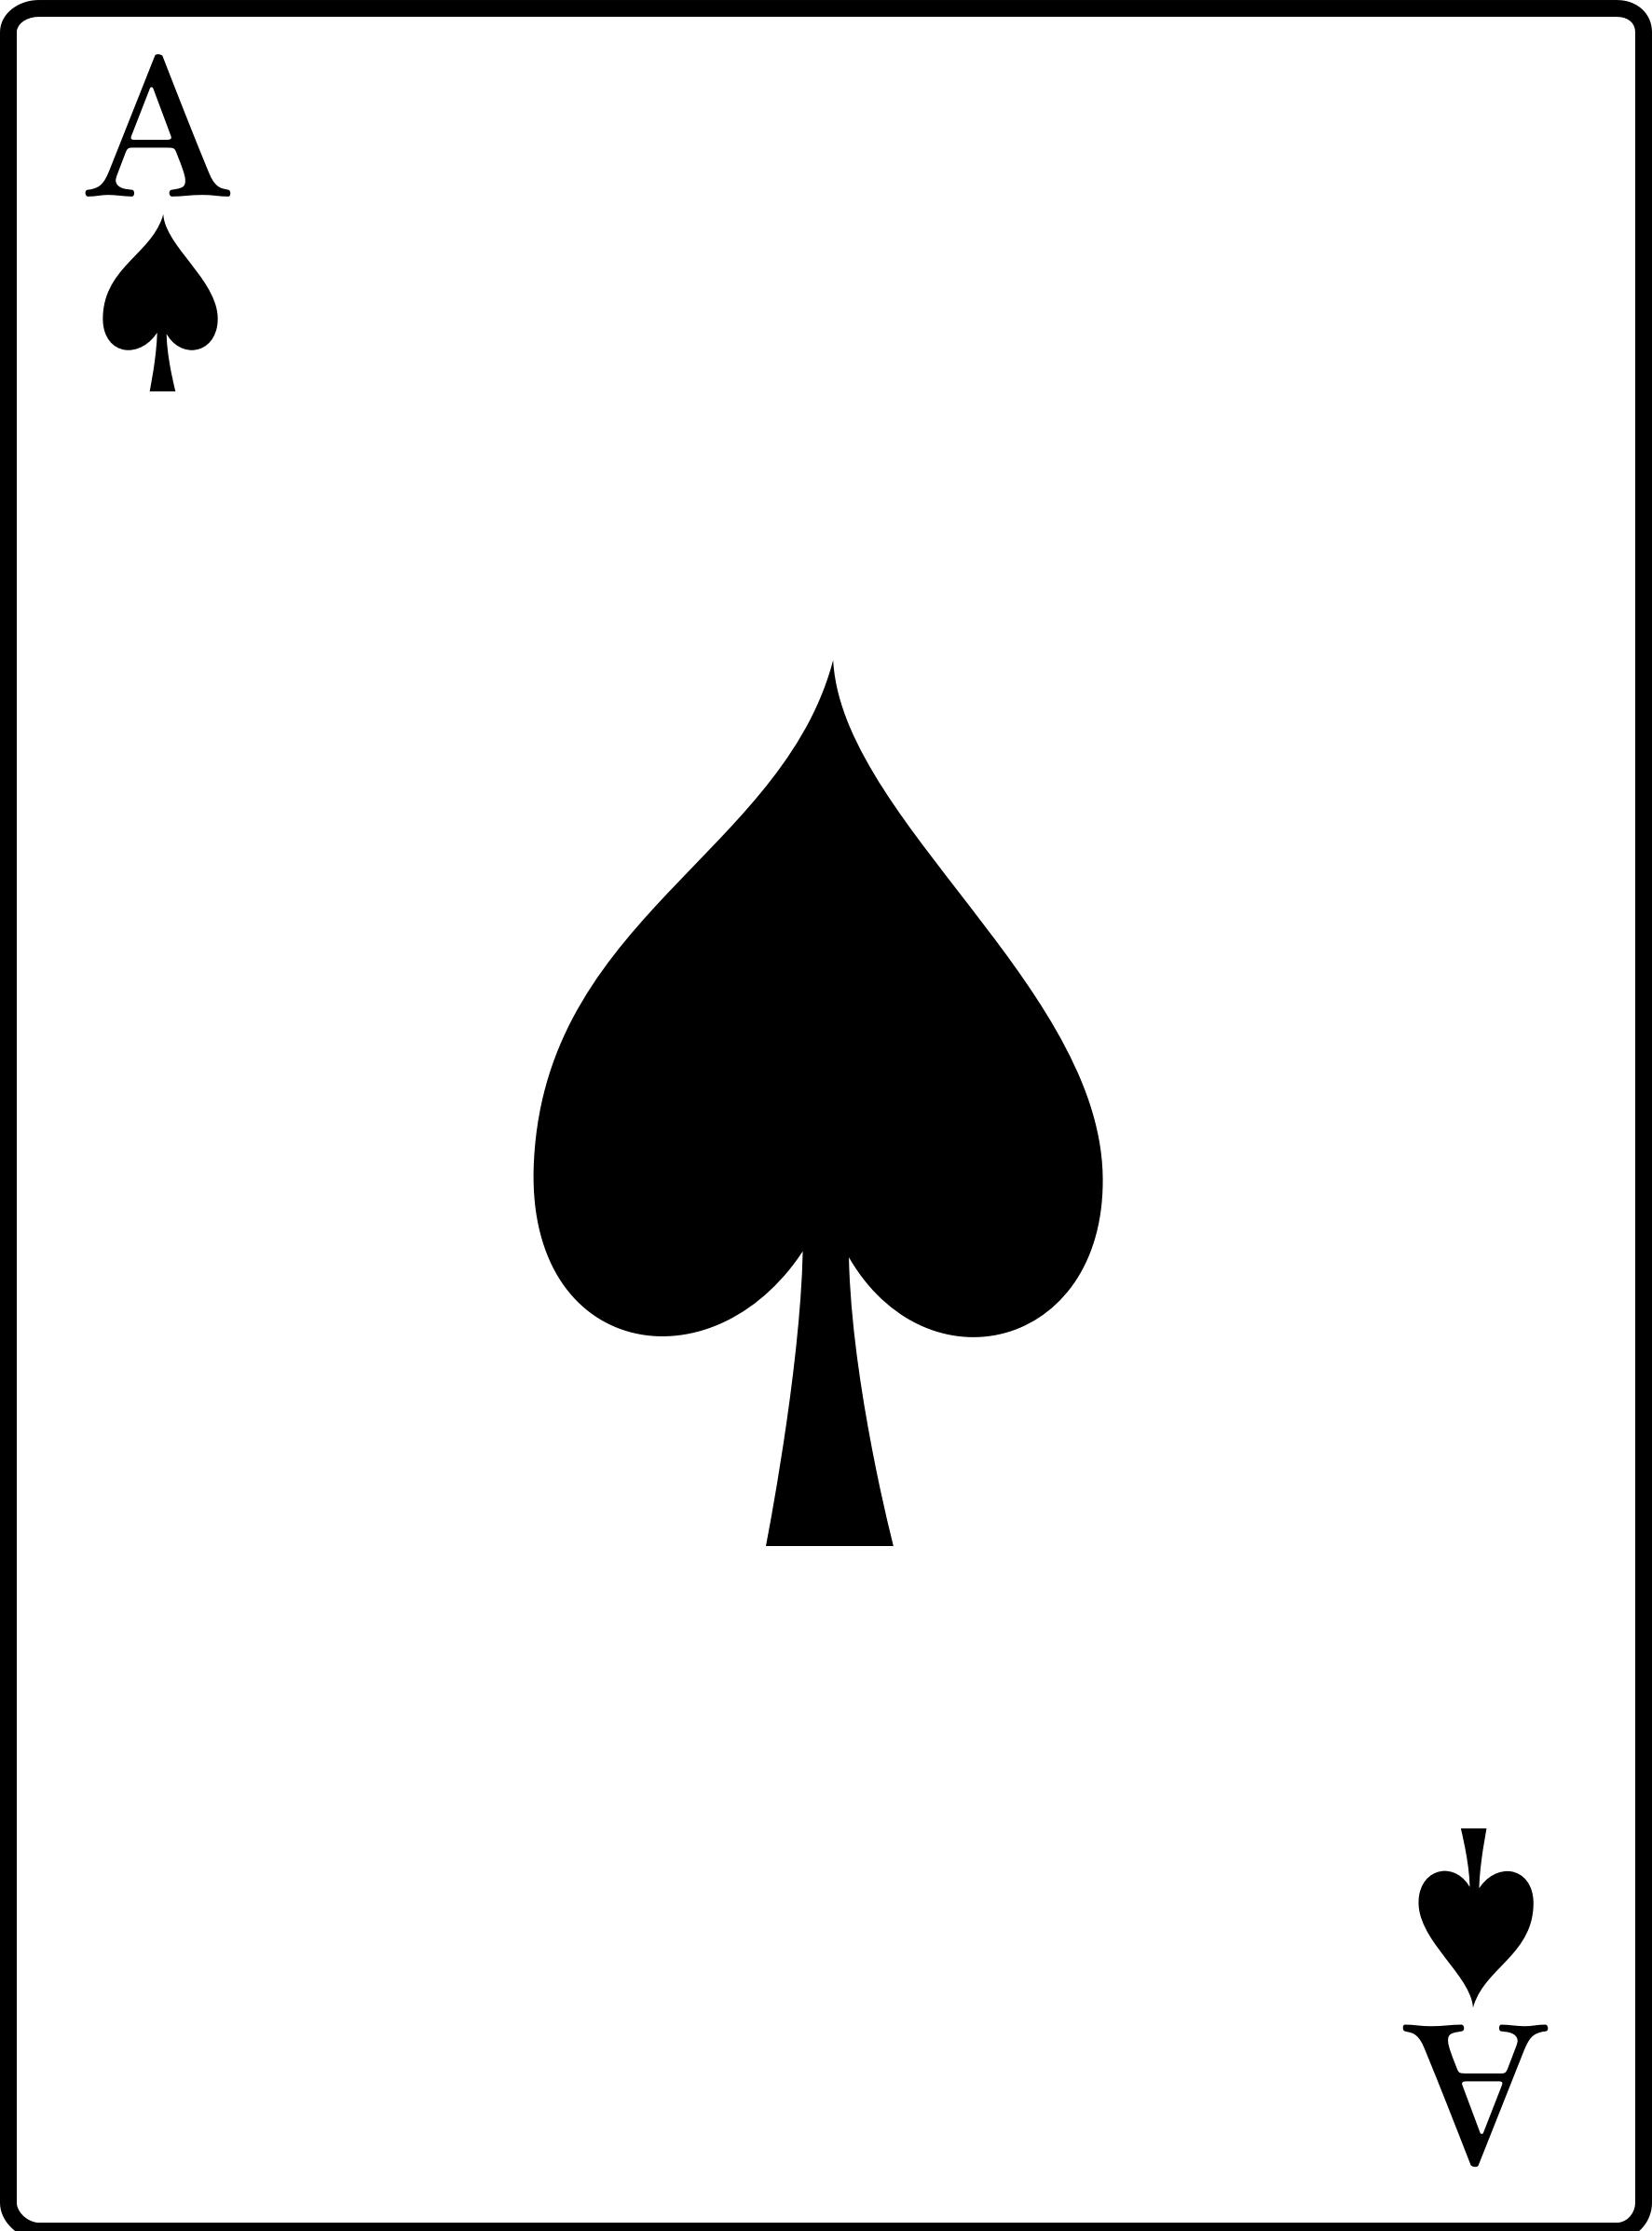 Big Image (Png) - Ace Card, Transparent background PNG HD thumbnail